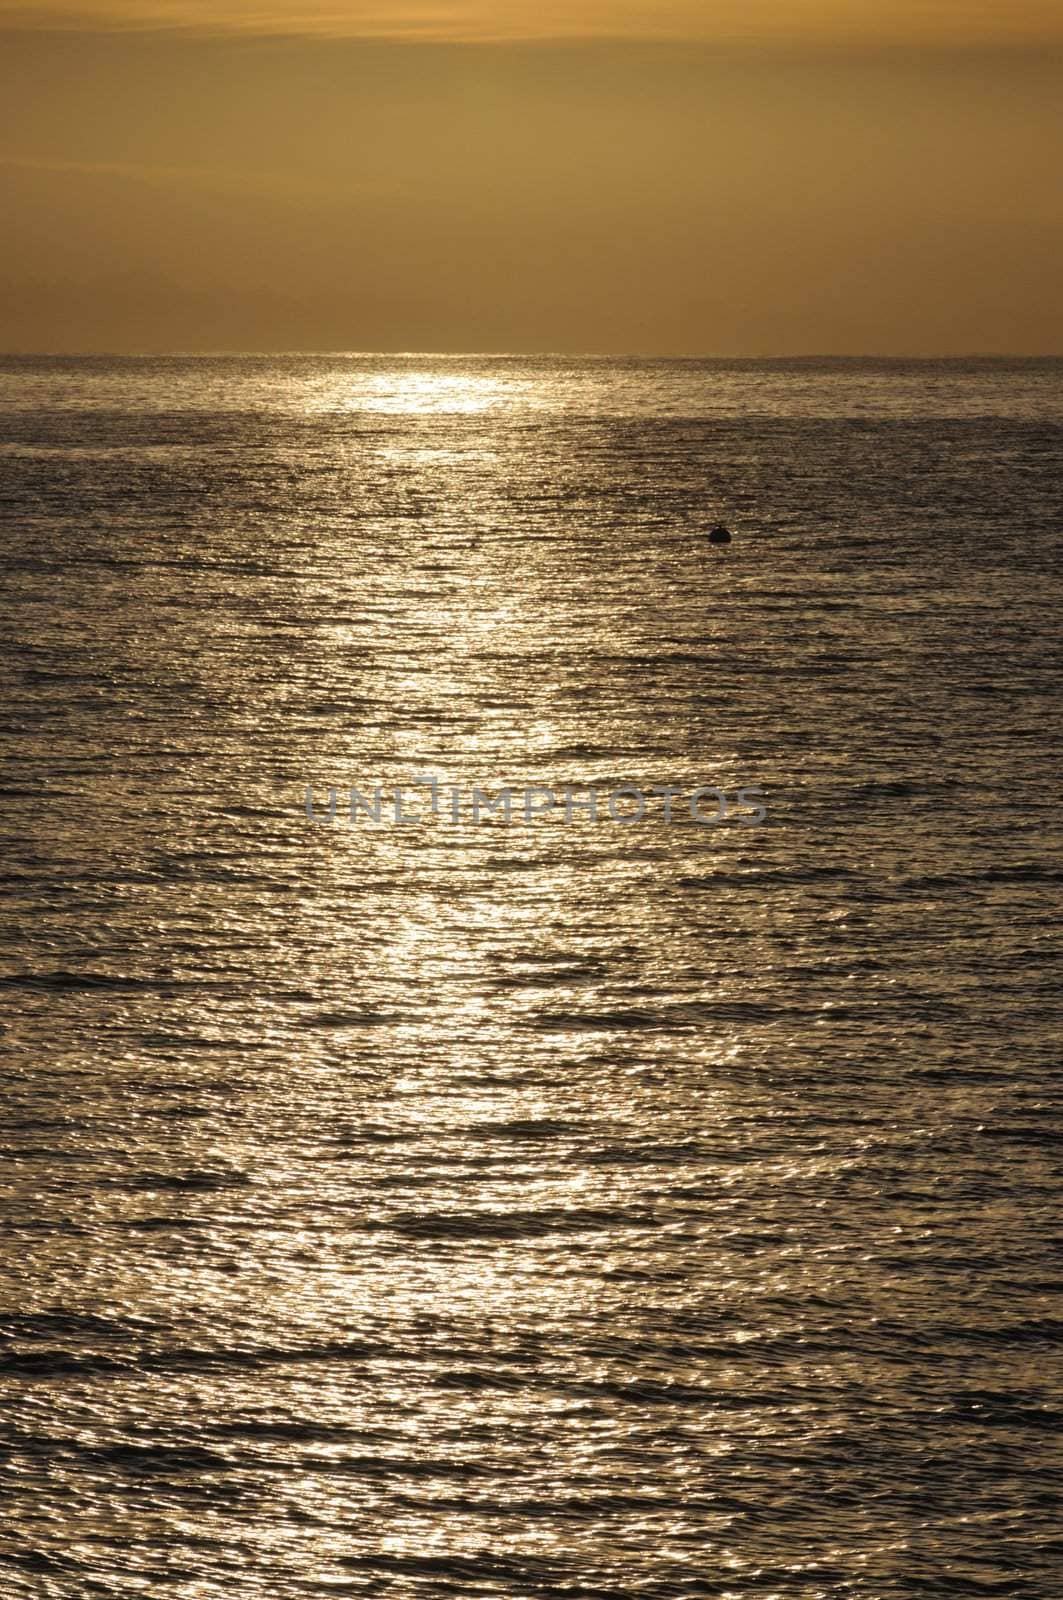 Sunrise reflecting on the water of the Pacific ocean in Maonterey bay.